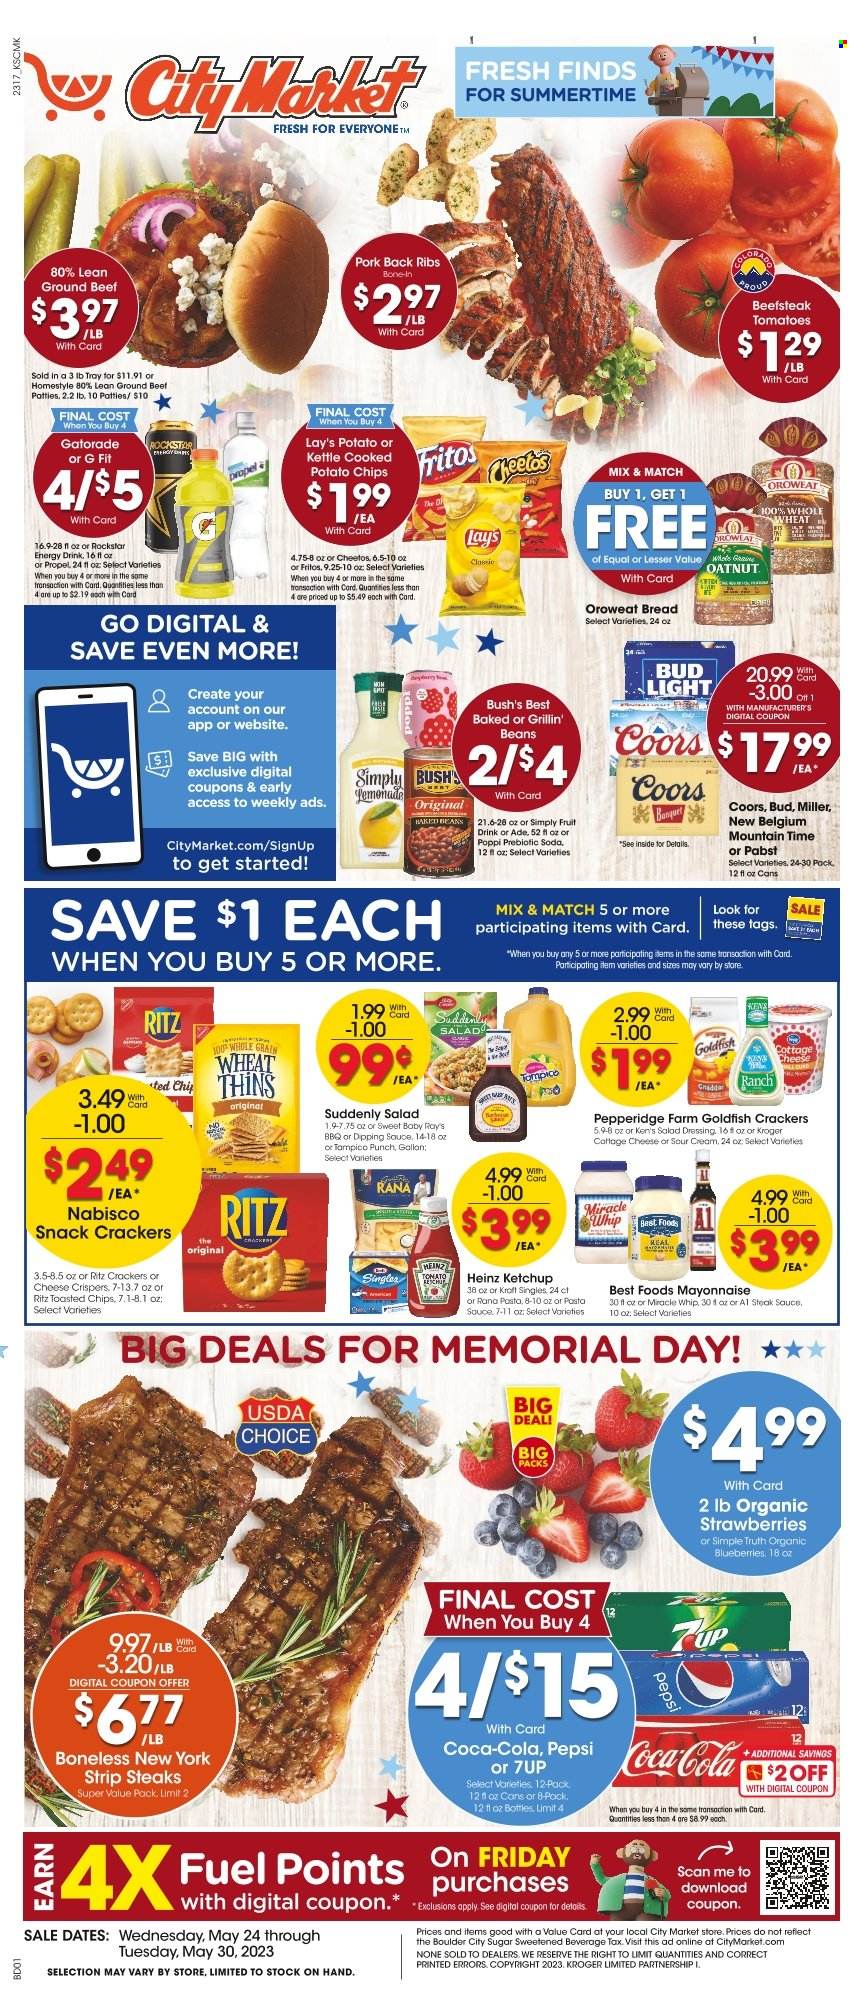 thumbnail - City Market Flyer - 05/24/2023 - 05/30/2023 - Sales products - bread, beans, tomatoes, blueberries, strawberries, pasta sauce, Kraft®, Rana, cottage cheese, sandwich slices, Kraft Singles, sour cream, mayonnaise, Miracle Whip, snack, crackers, RITZ, Nabisco, Fritos, potato chips, Cheetos, chips, Lay’s, Thins, Goldfish, salty snack, sugar, Heinz, baked beans, salad dressing, steak sauce, ketchup, dressing, Coca-Cola, lemonade, Pepsi, energy drink, fruit drink, soft drink, Rockstar, Gatorade, fruit punch, soda, beer, Bud Light, Miller, Pabst, beef meat, ground beef, steak, striploin steak, ribs, pork meat, pork ribs, pork back ribs, tray, electrolyte drink, Coors. Page 1.